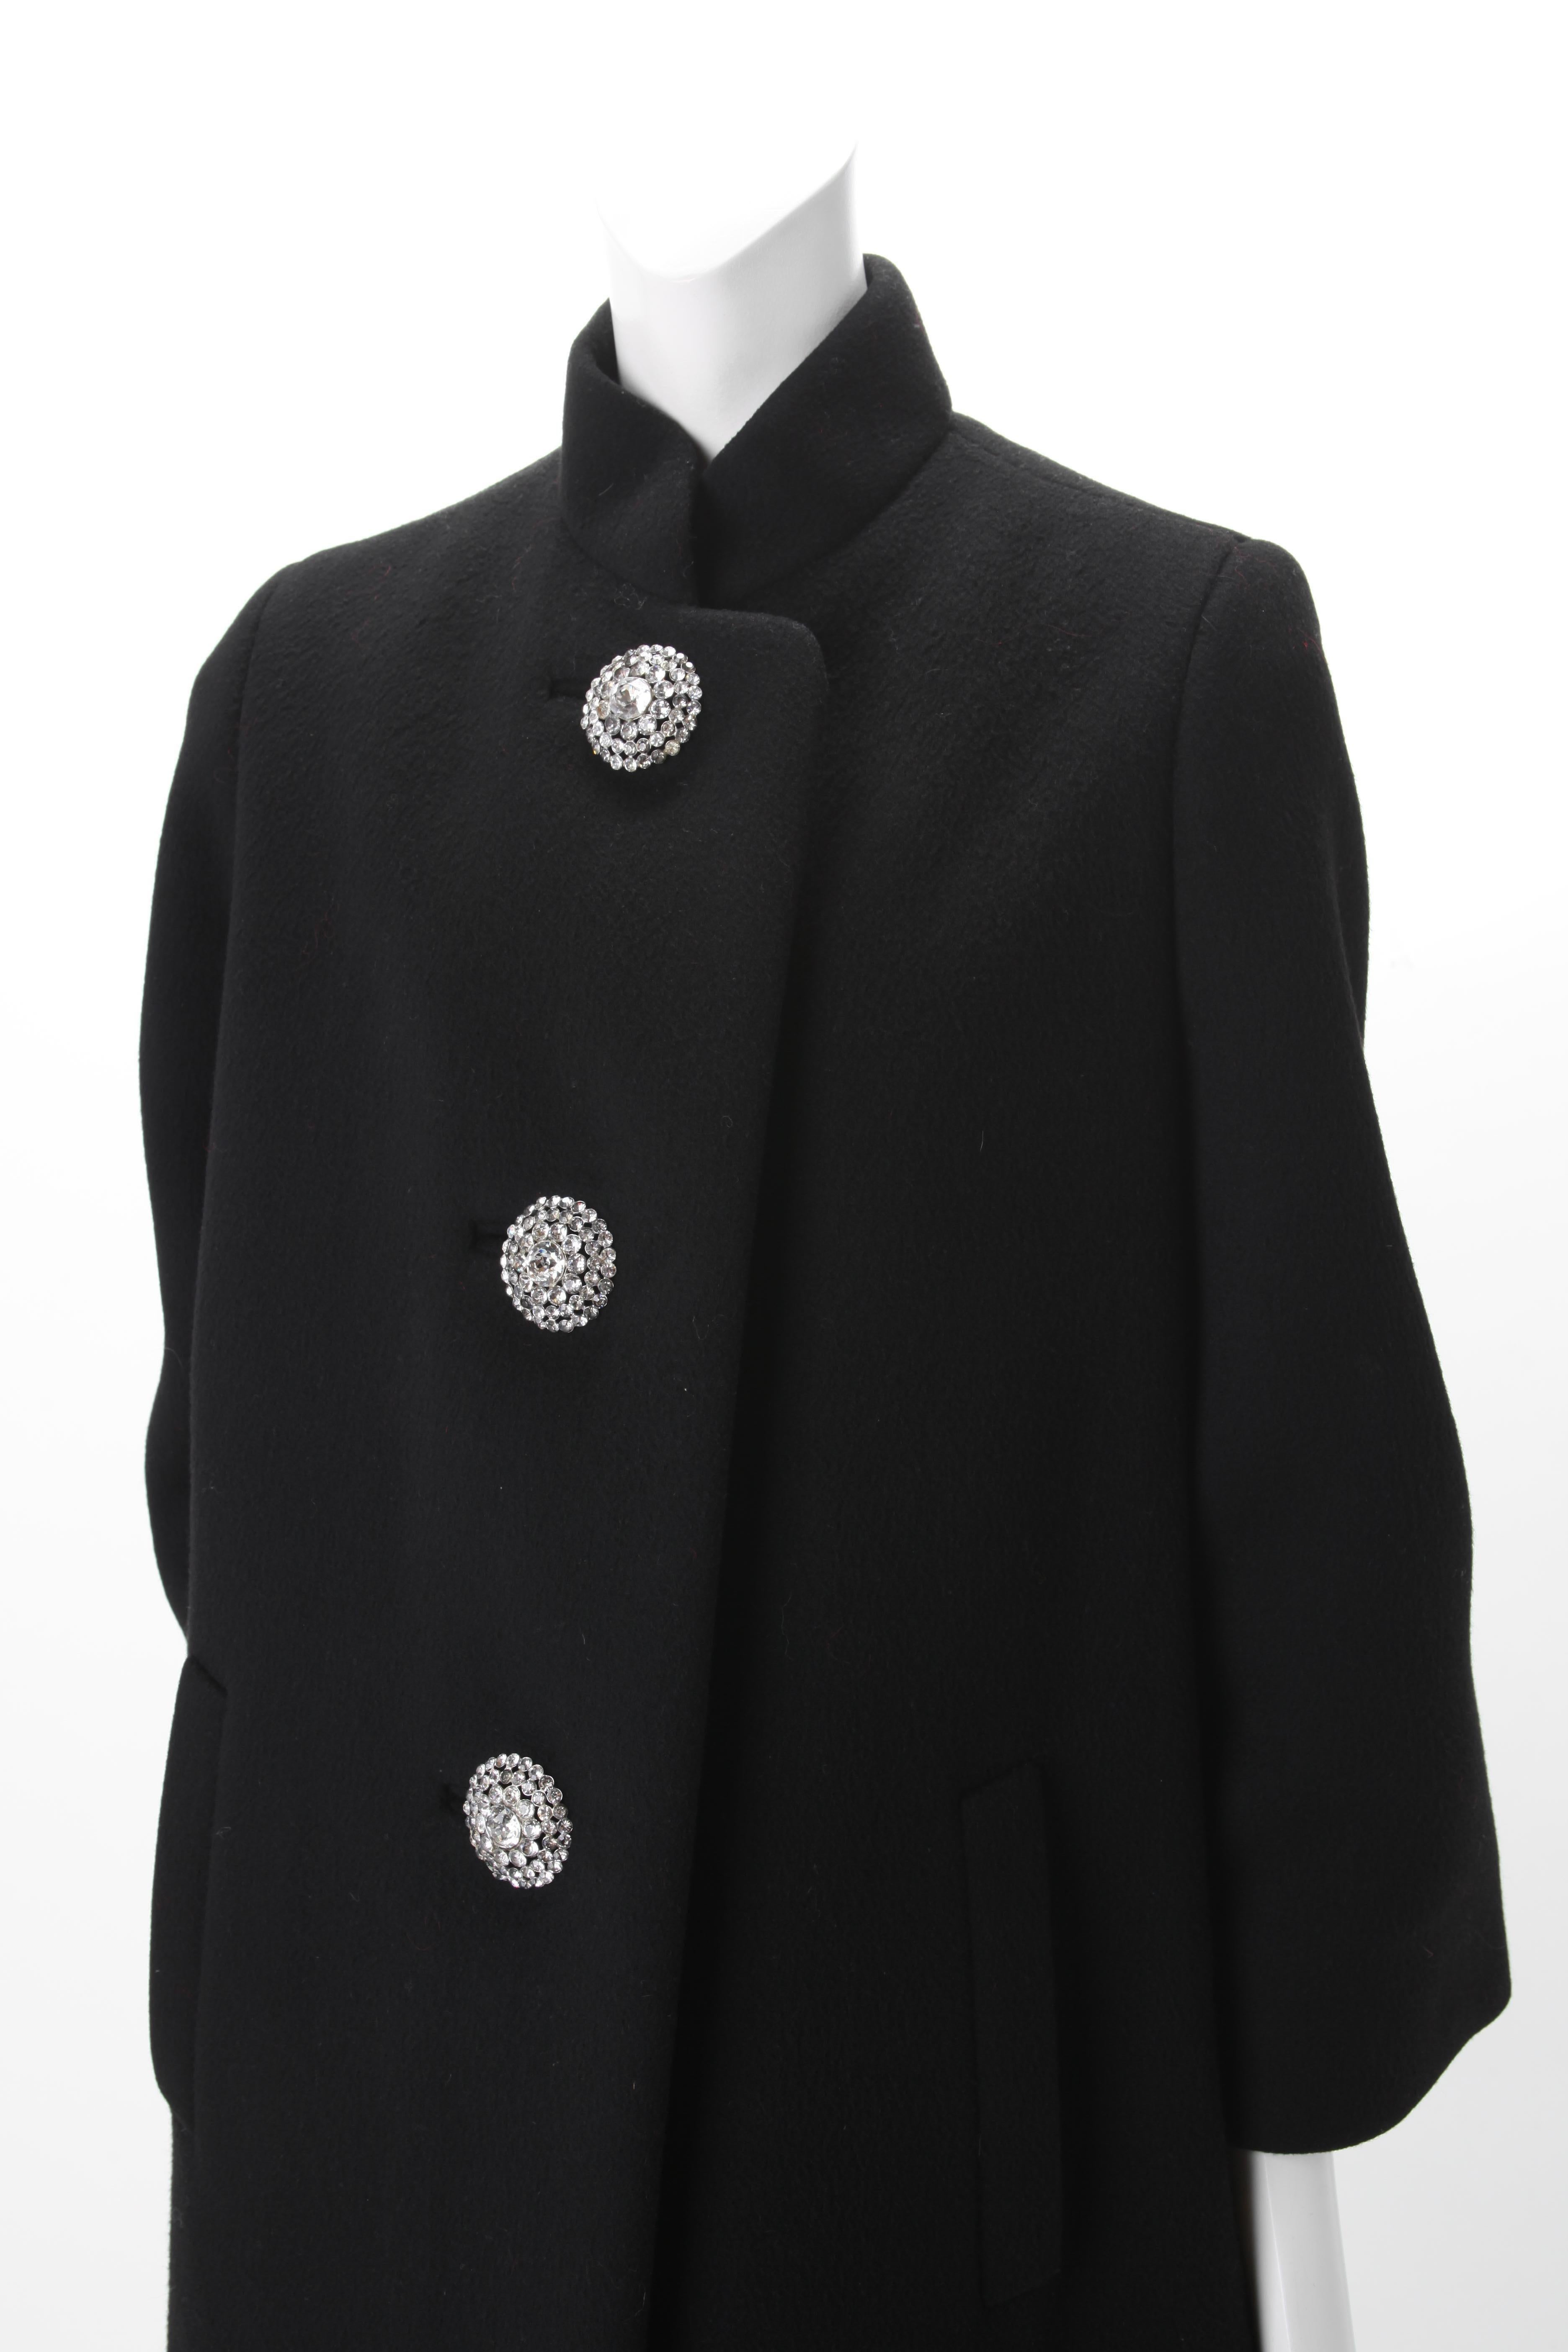 Norman Norell Couture Black Wool Coat with Rhinestone Encrusted Buttons, c.1960s
A-Line Norman Norell Couture Black Wool Coat with Mandarin collar and welt bound pockets at hip. Featuring three large Rhinestone encrusted buttons at center